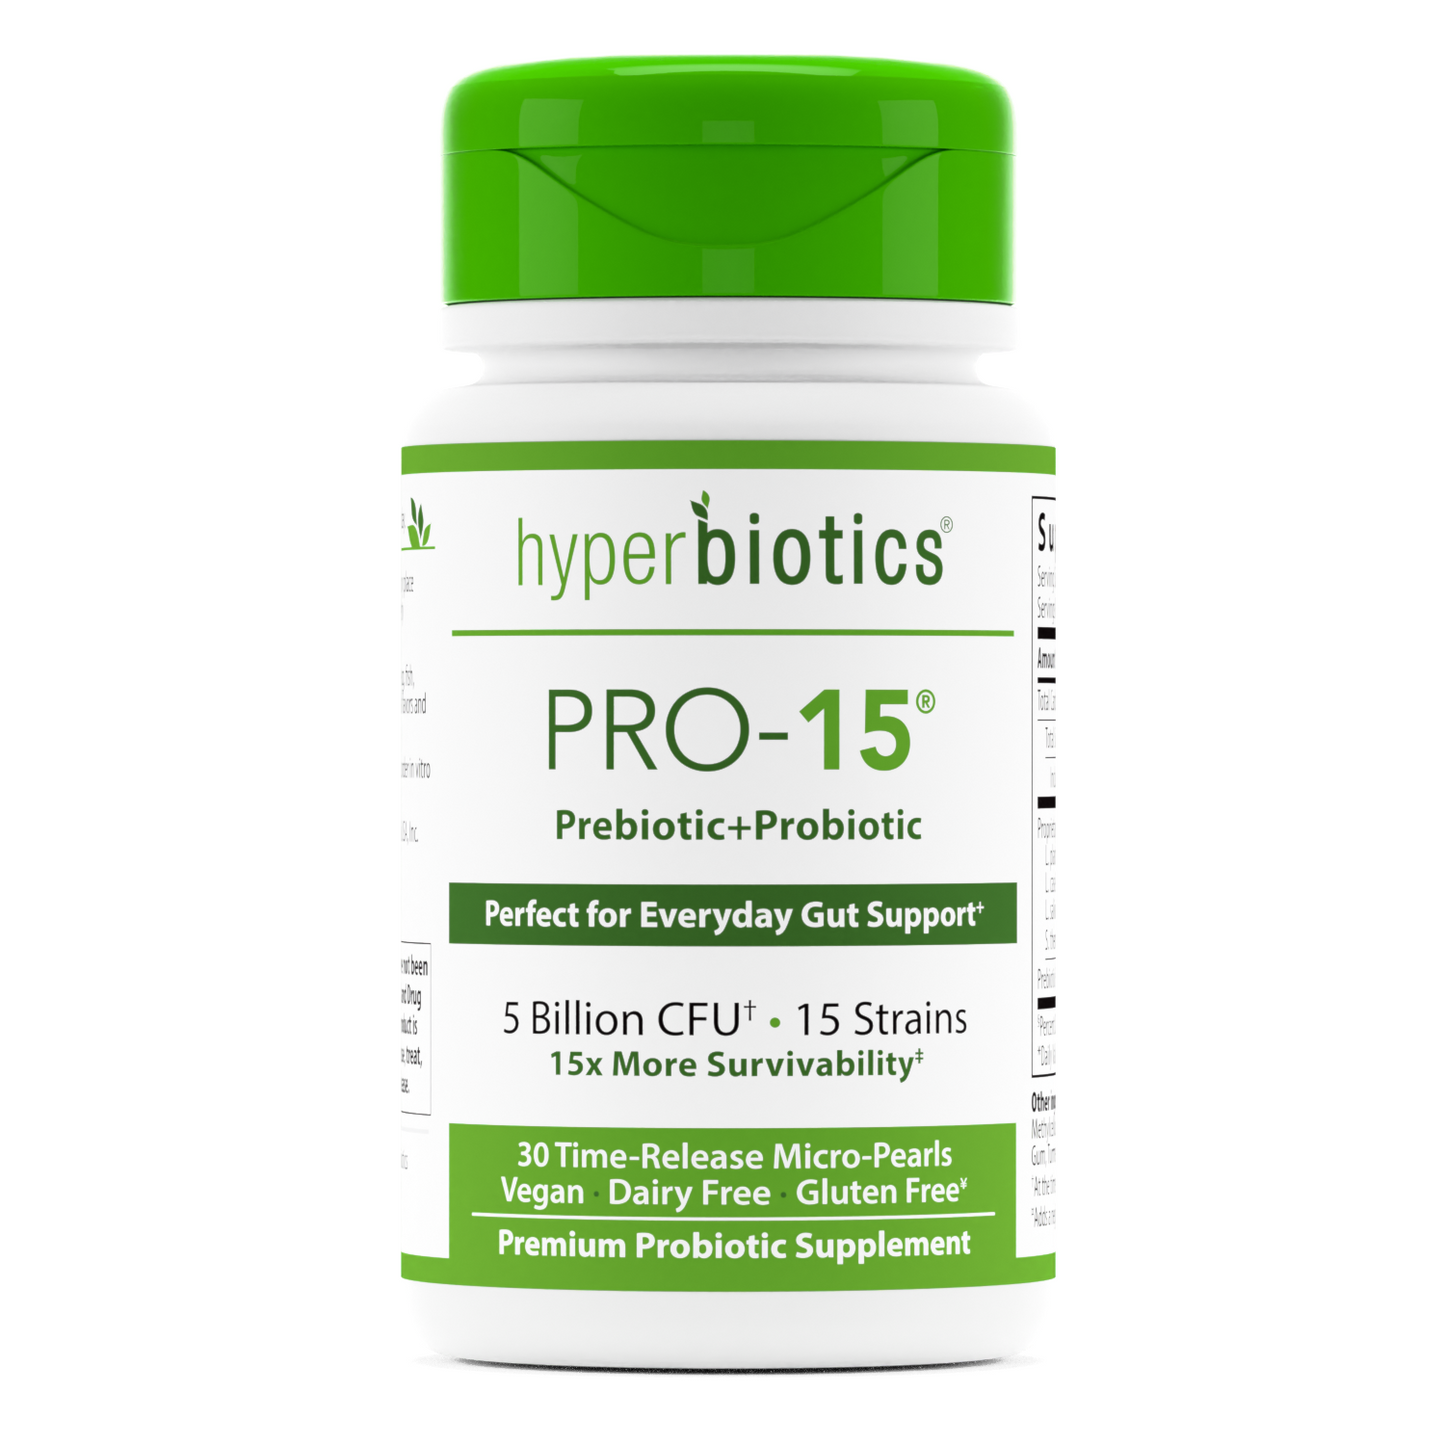 PRO-15: Perfect for Everyday Gut Support* - Hyperbiotics 30ct bottle